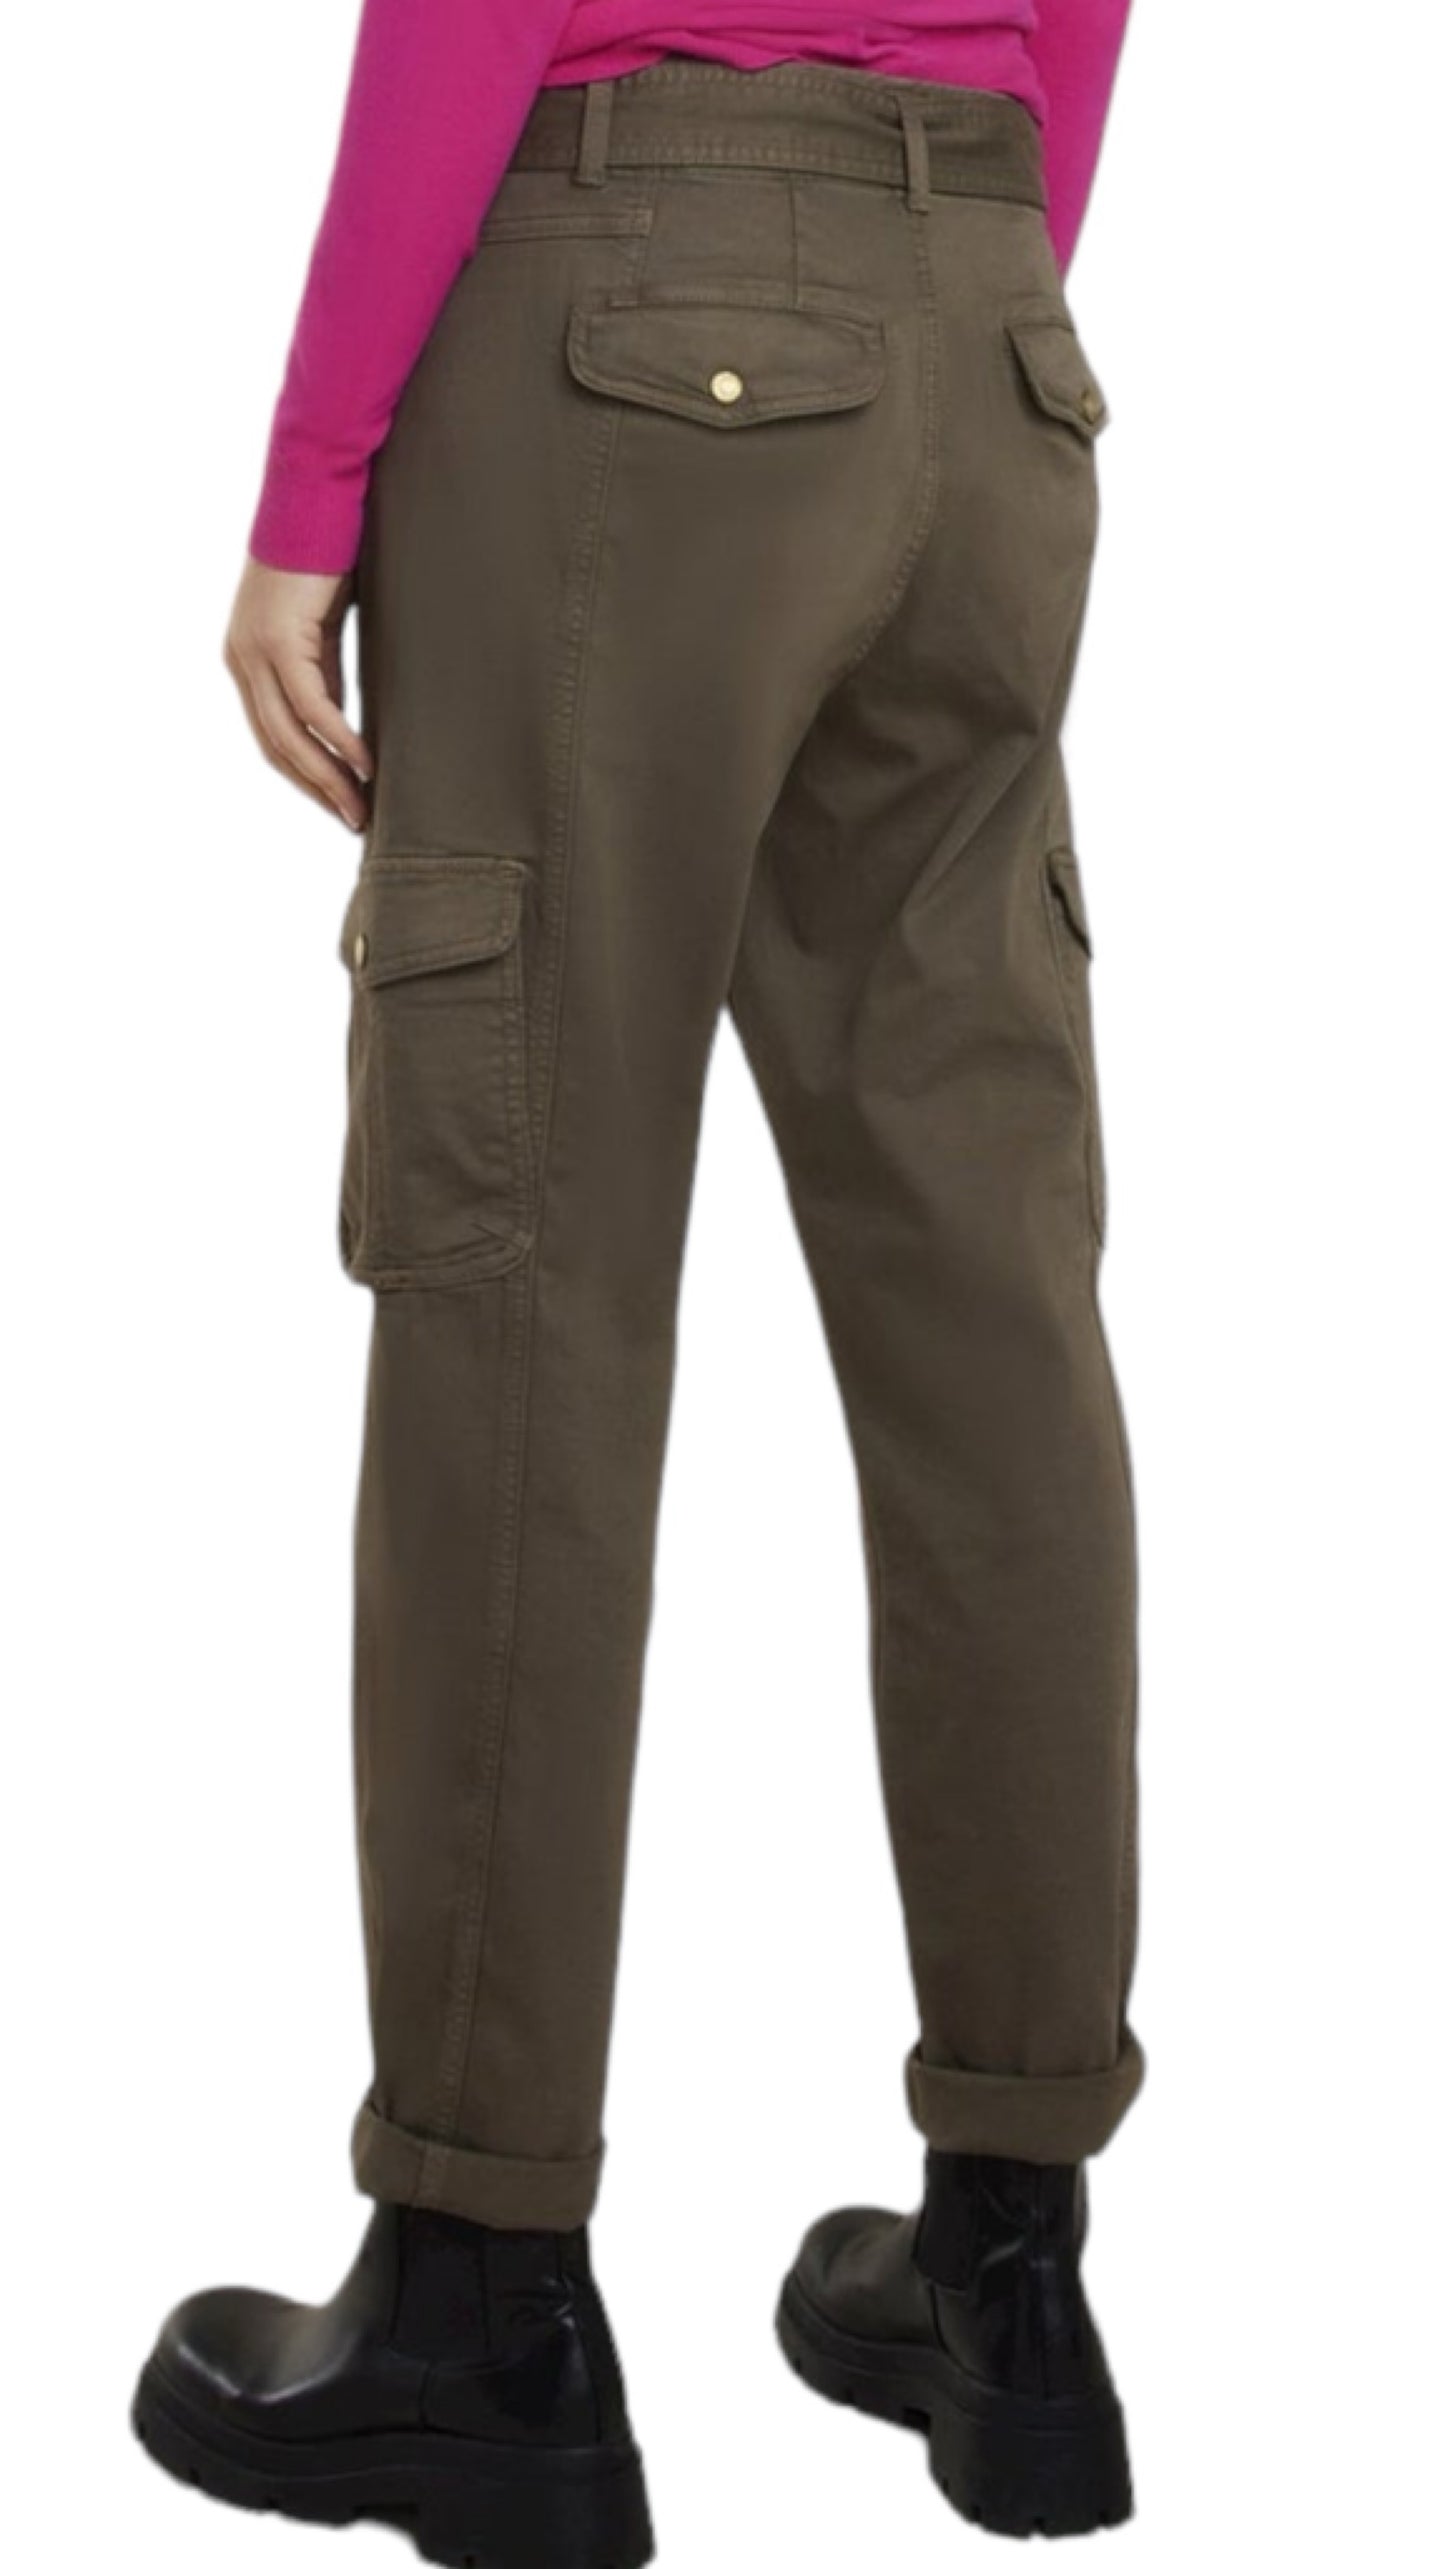 Tapered pants peach (Forest)